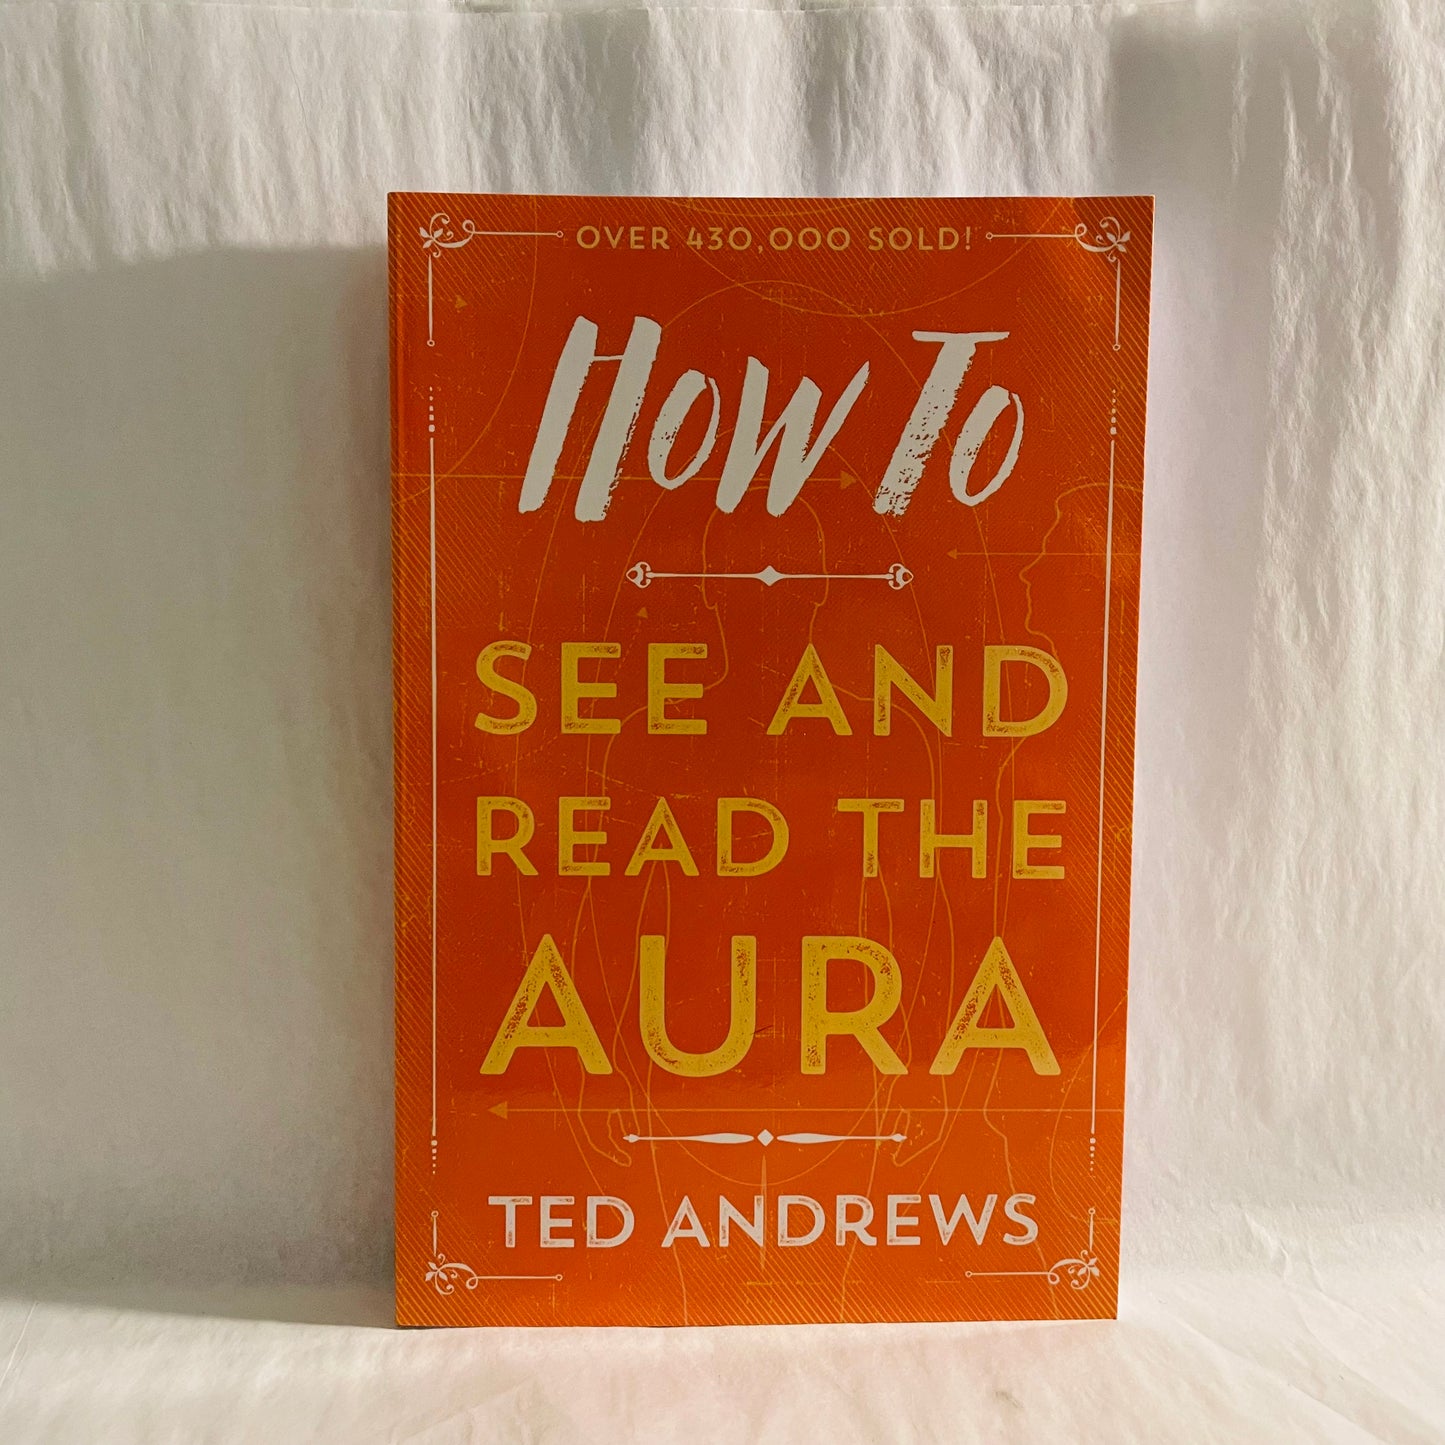 How To See and Read The Aura